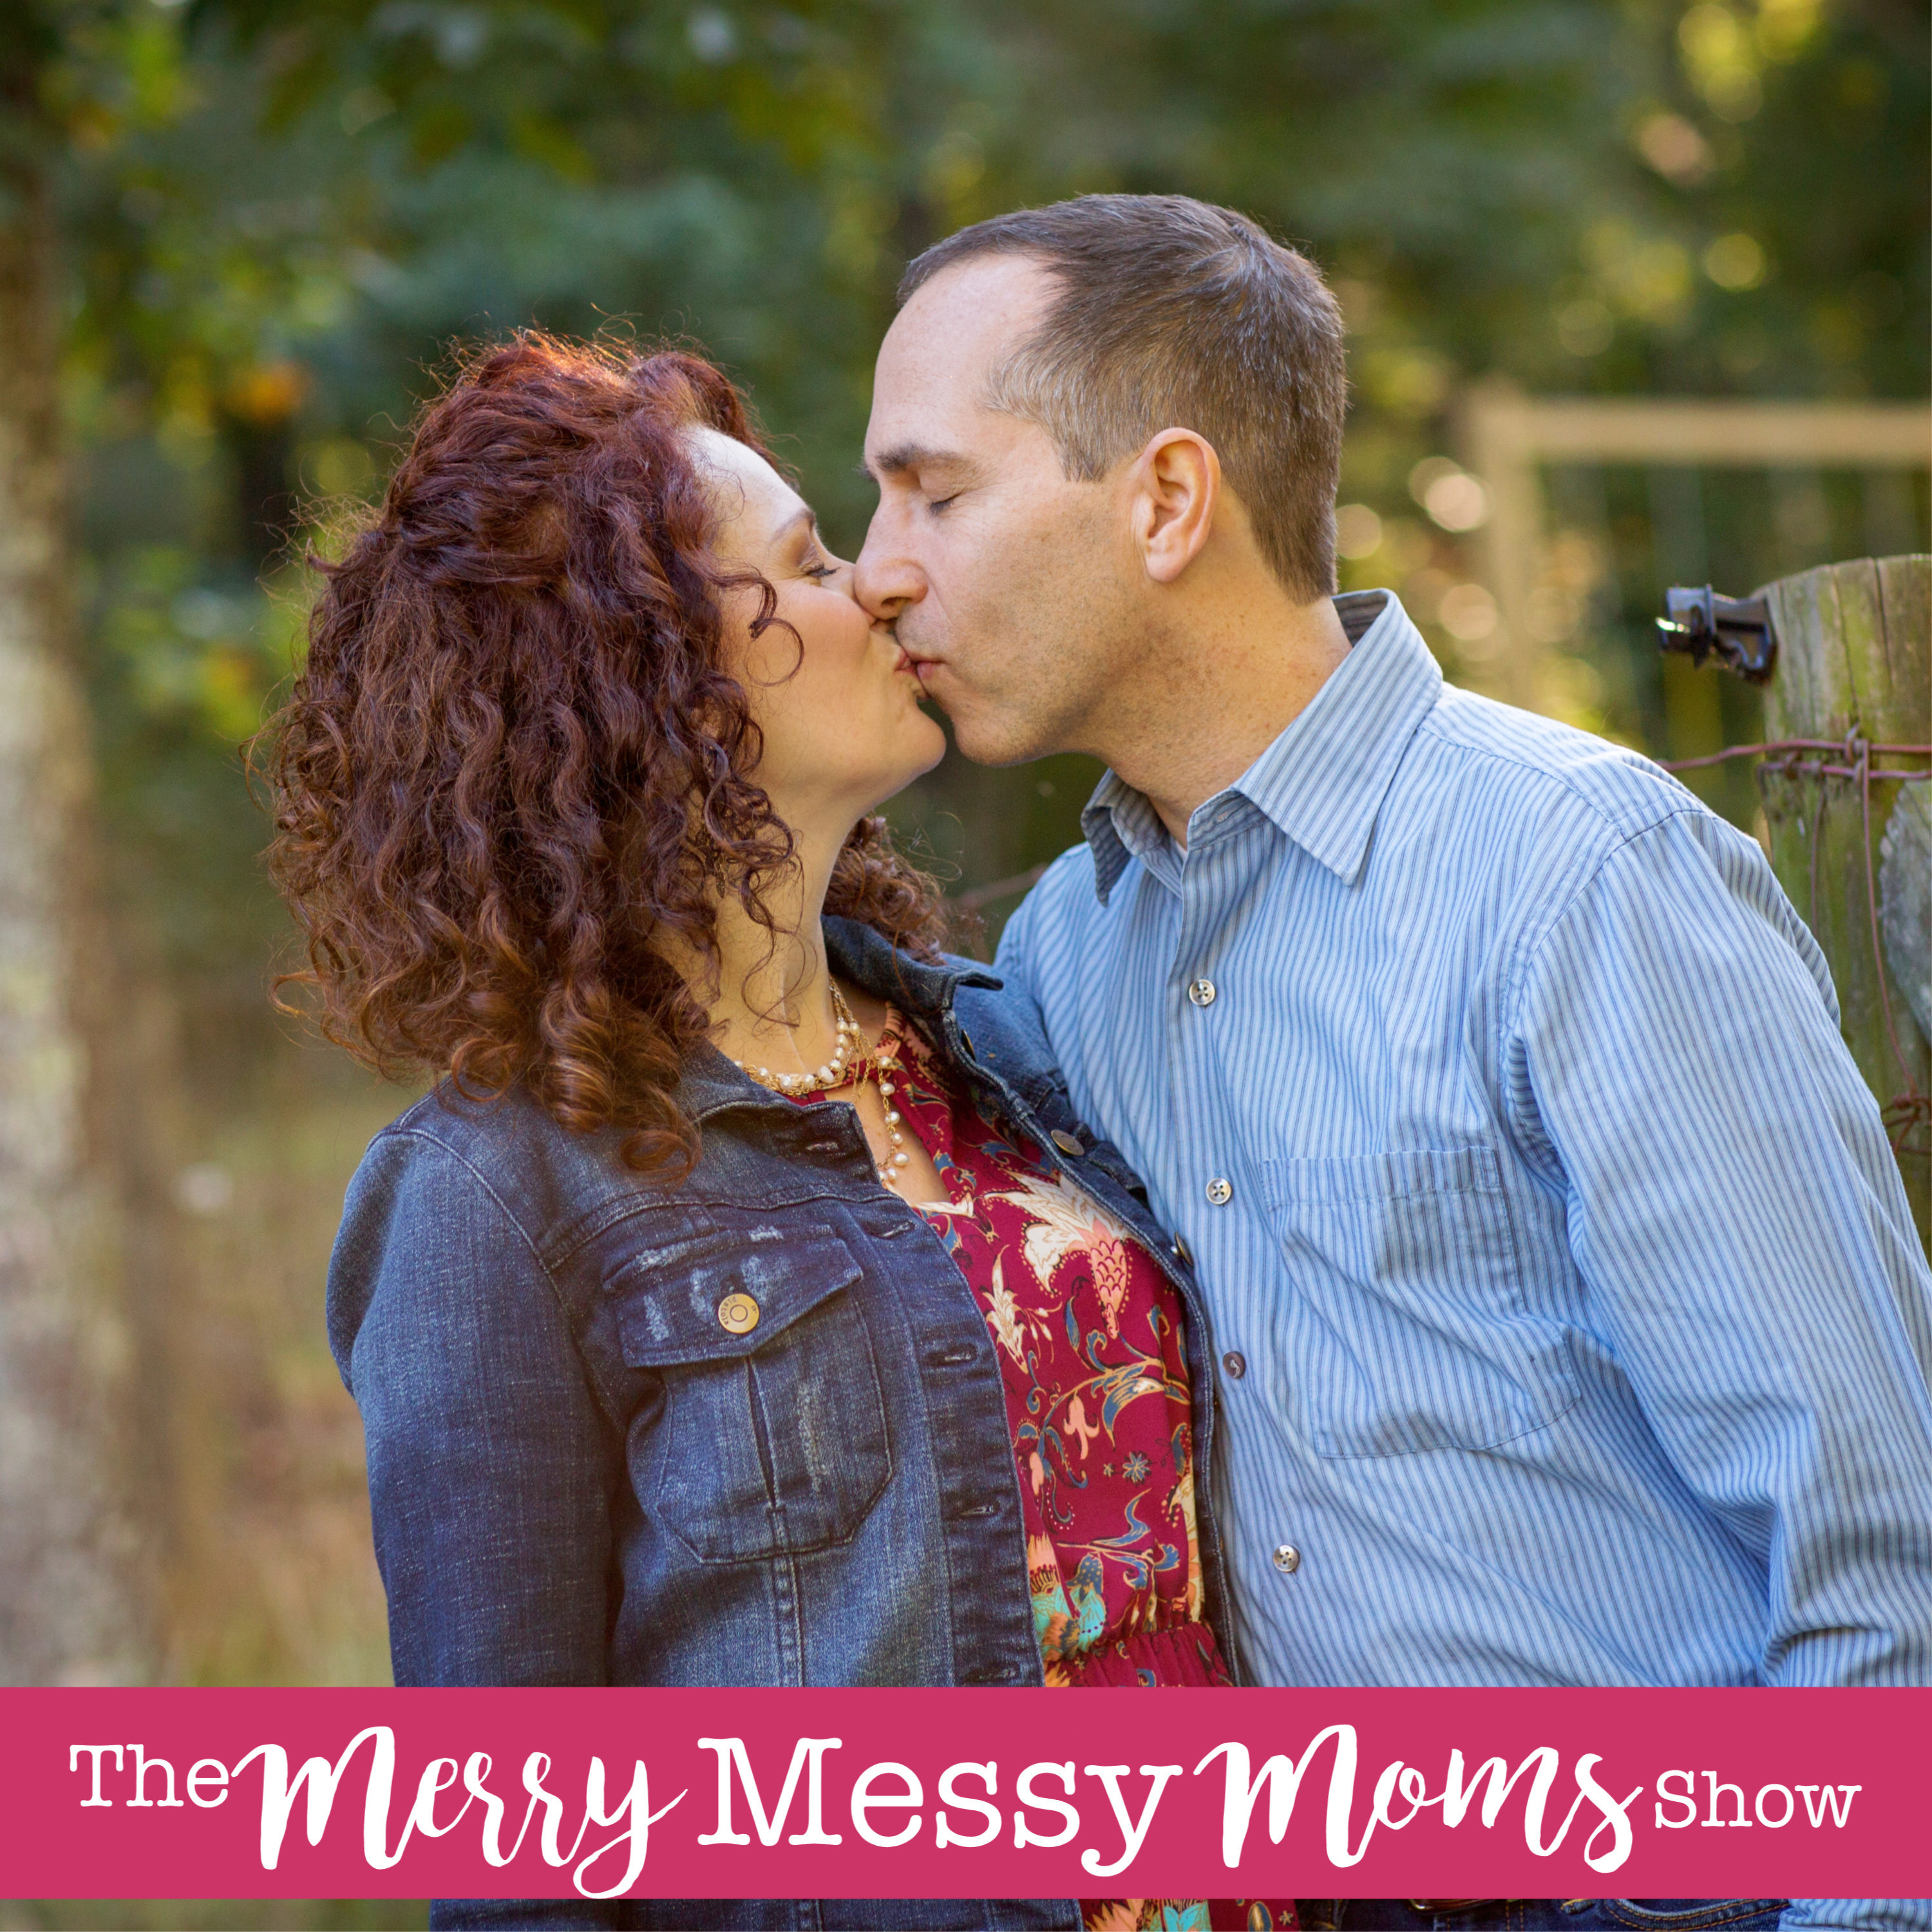 The Merry Messy Moms Show- Four reasons we nag our husbands and how to stop